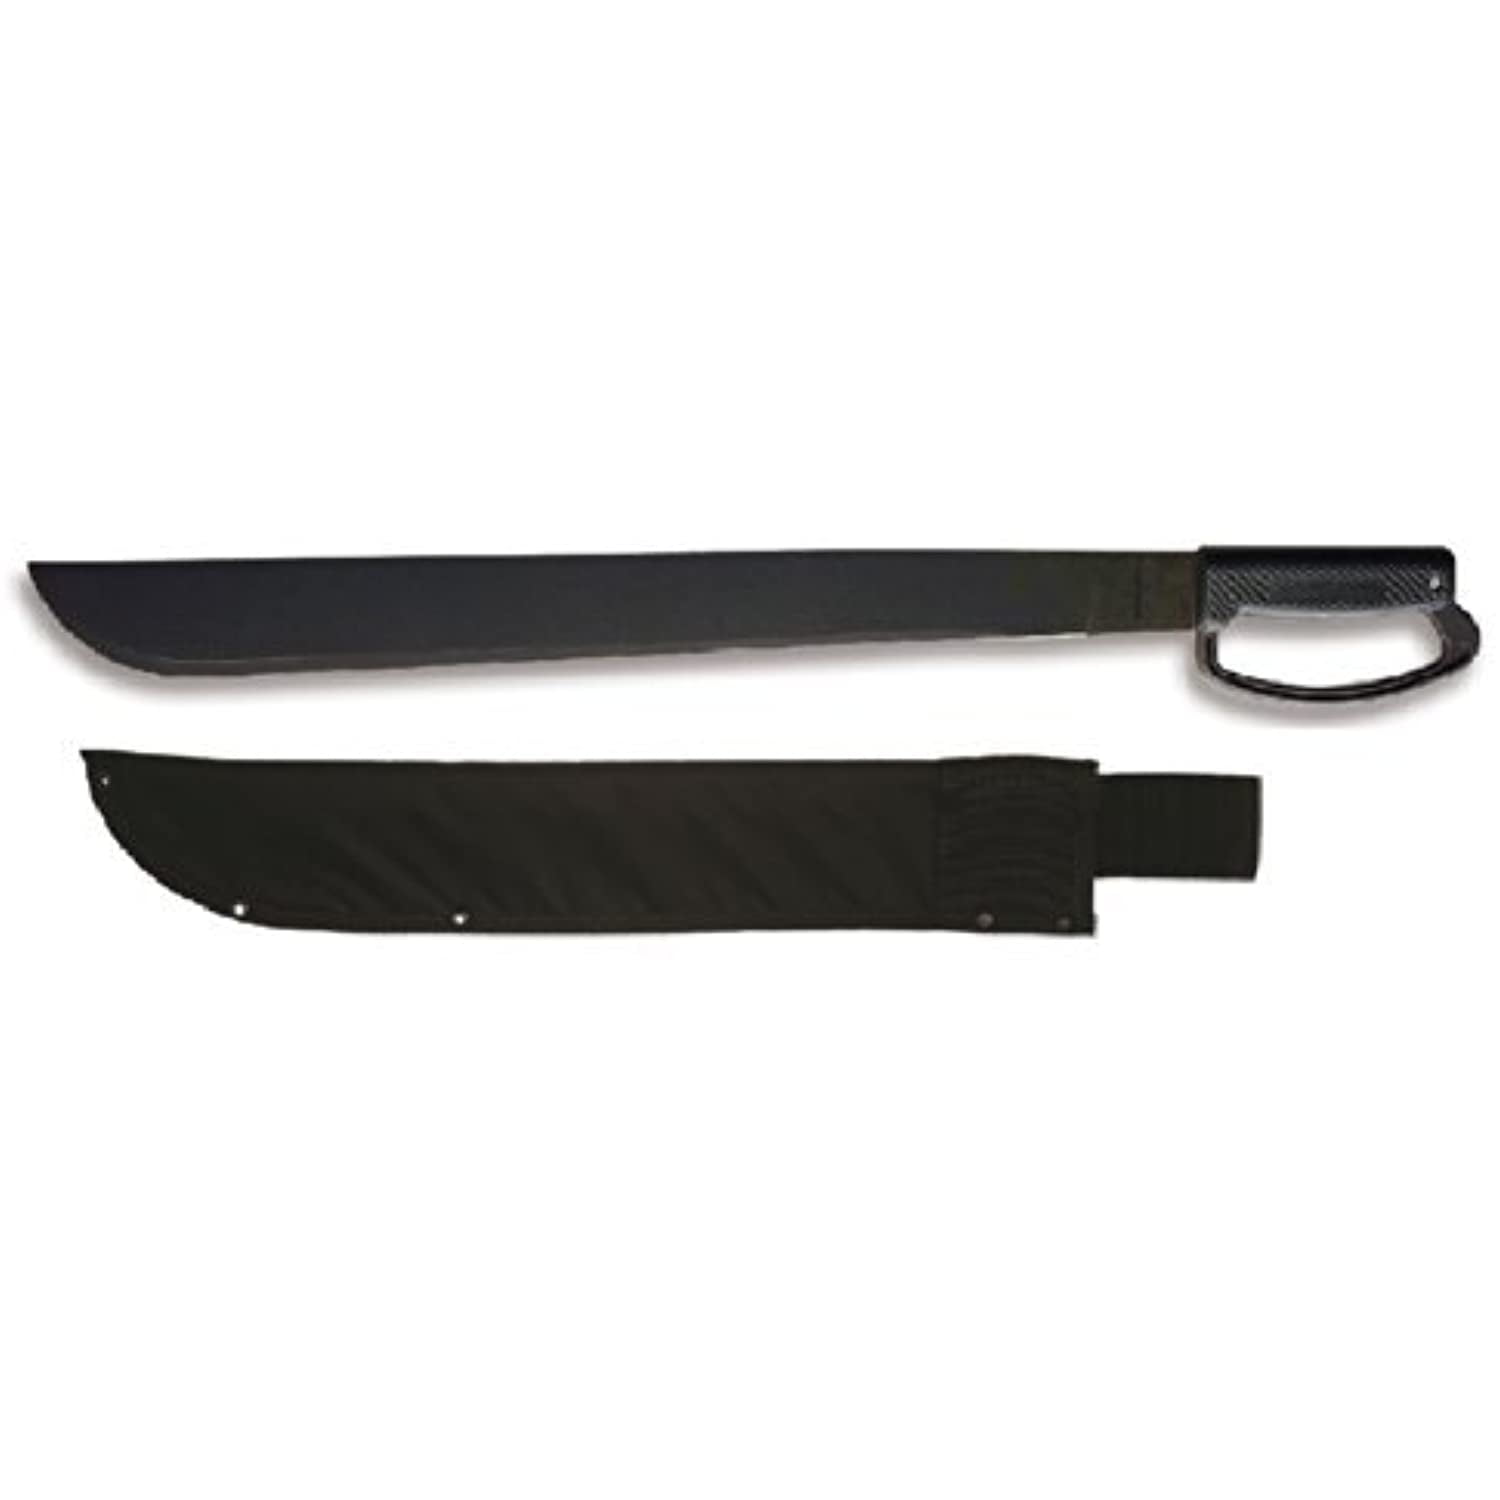 Kershaw Camp 18 24" overall 18" black powder coated 65MN carbon tool steel blad 